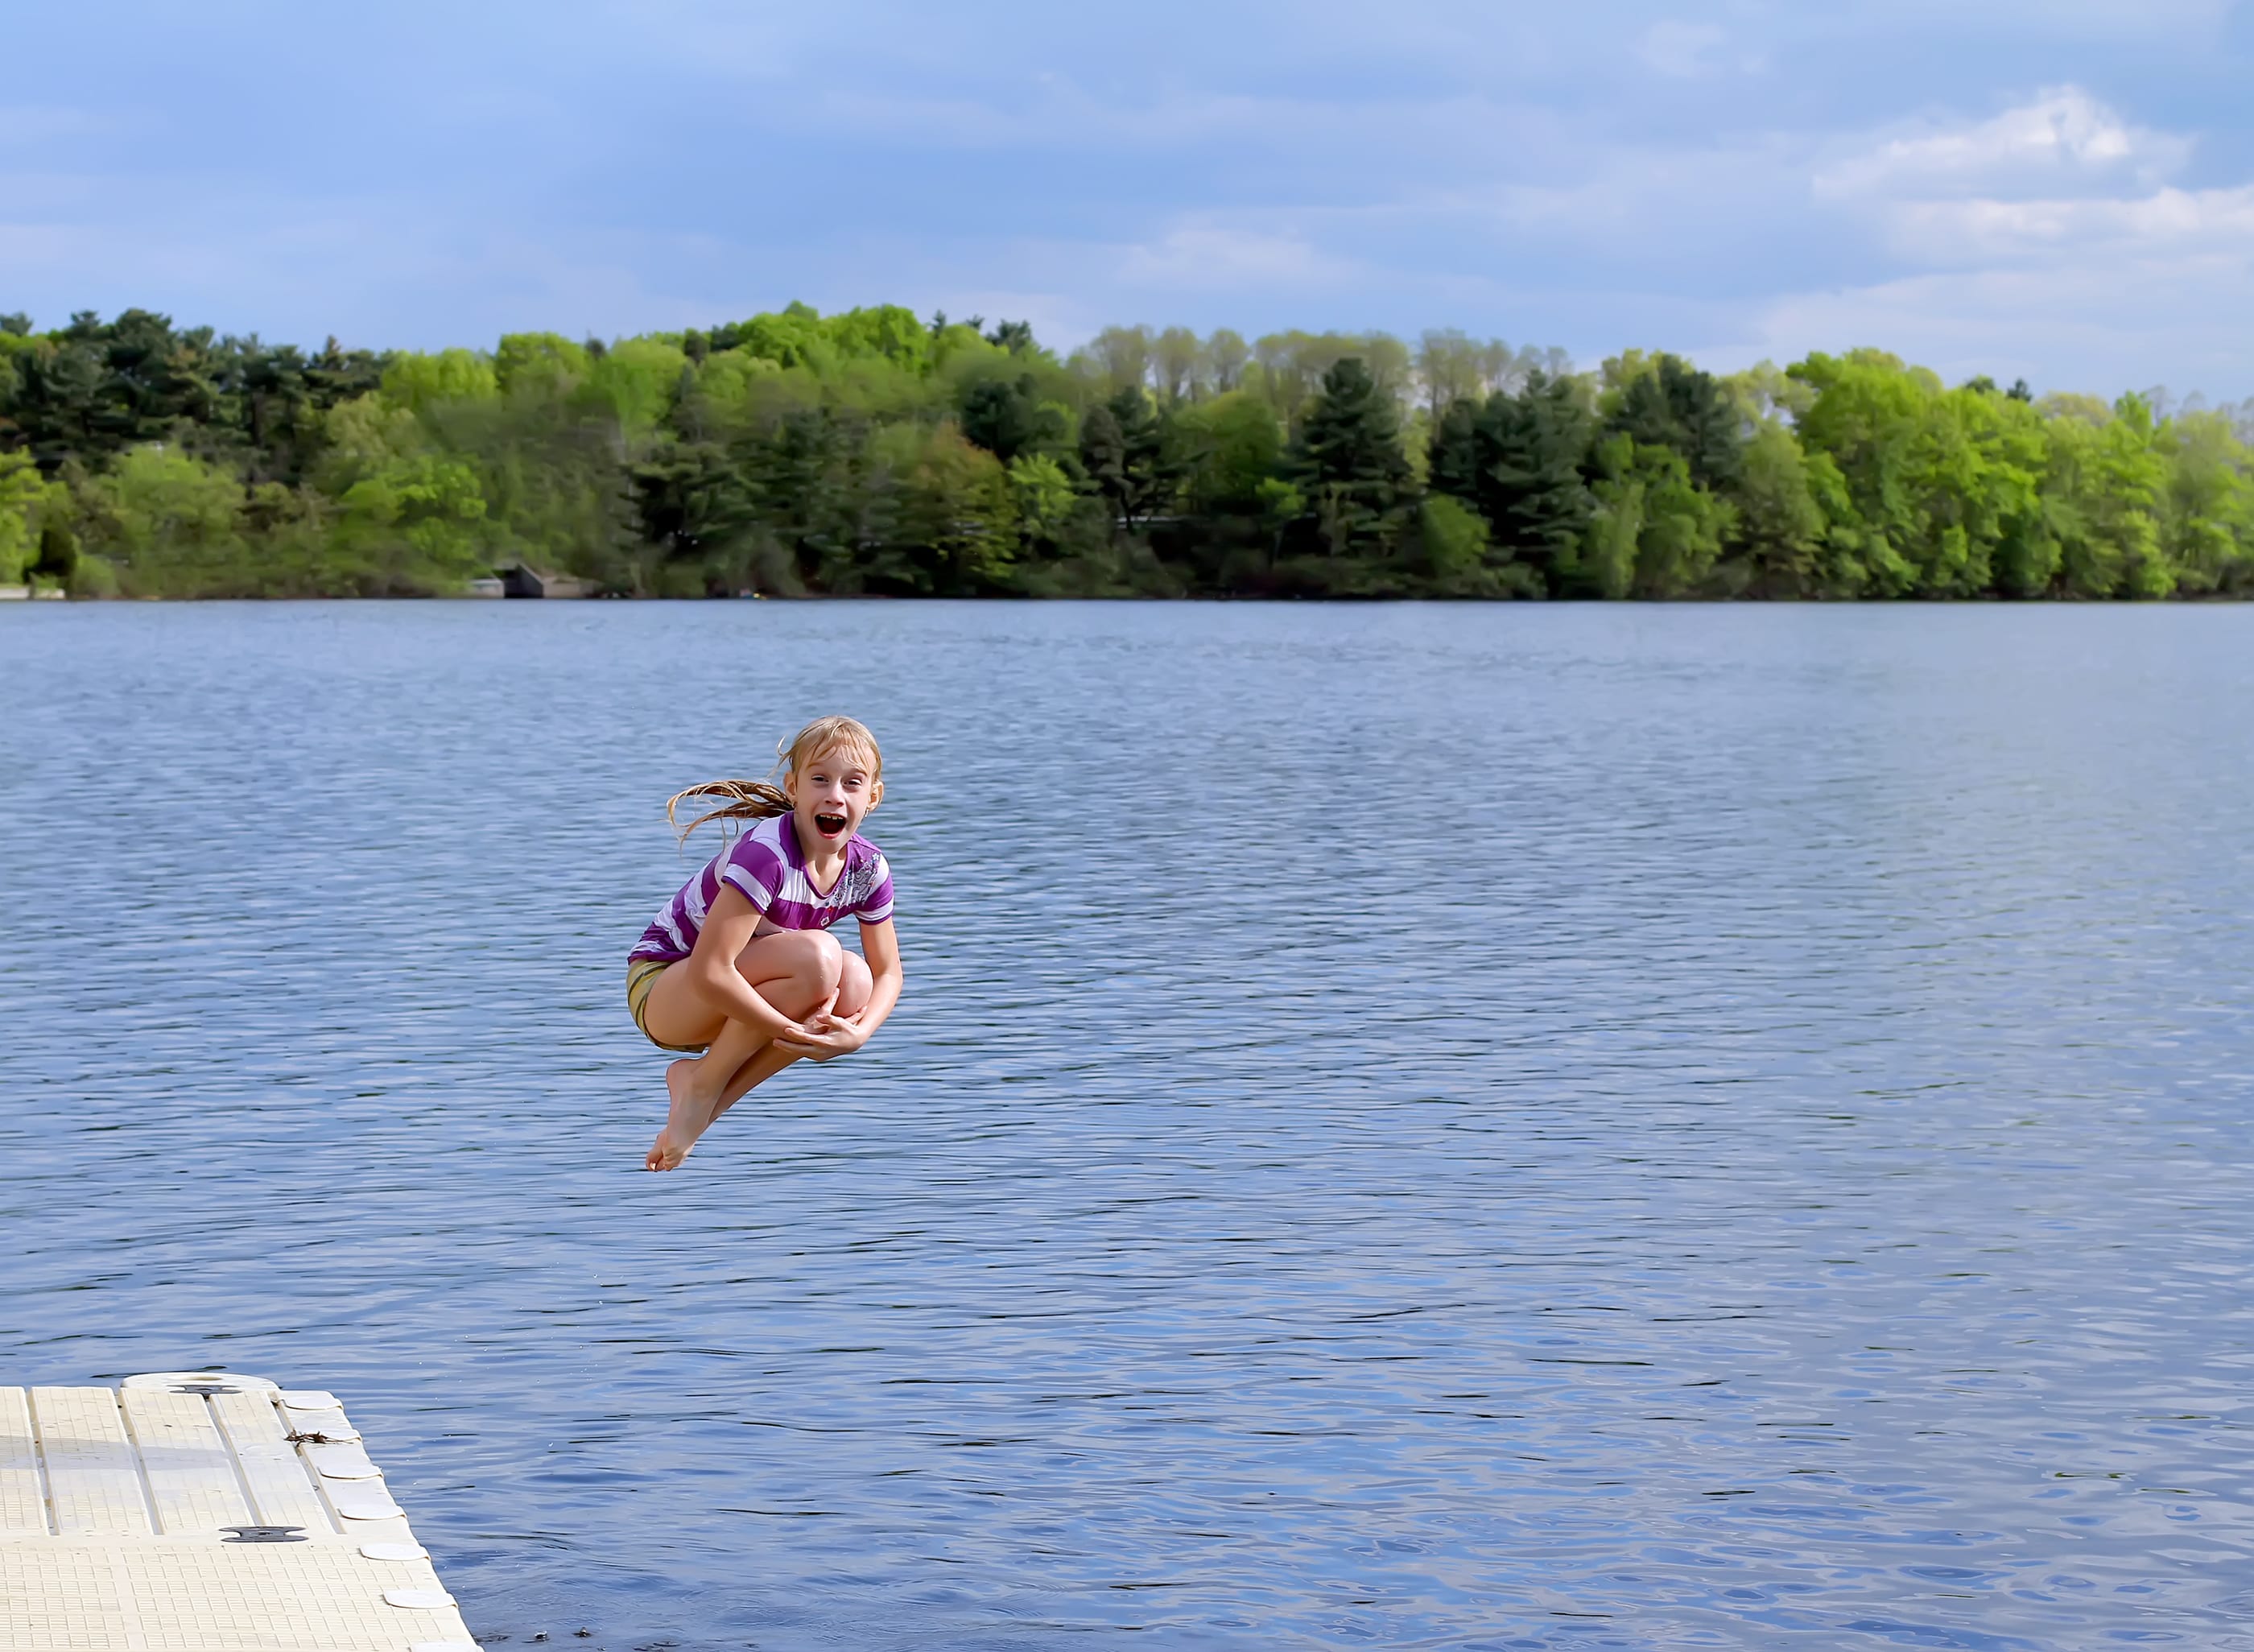 Girl doing a cannonball off a dock into a lake